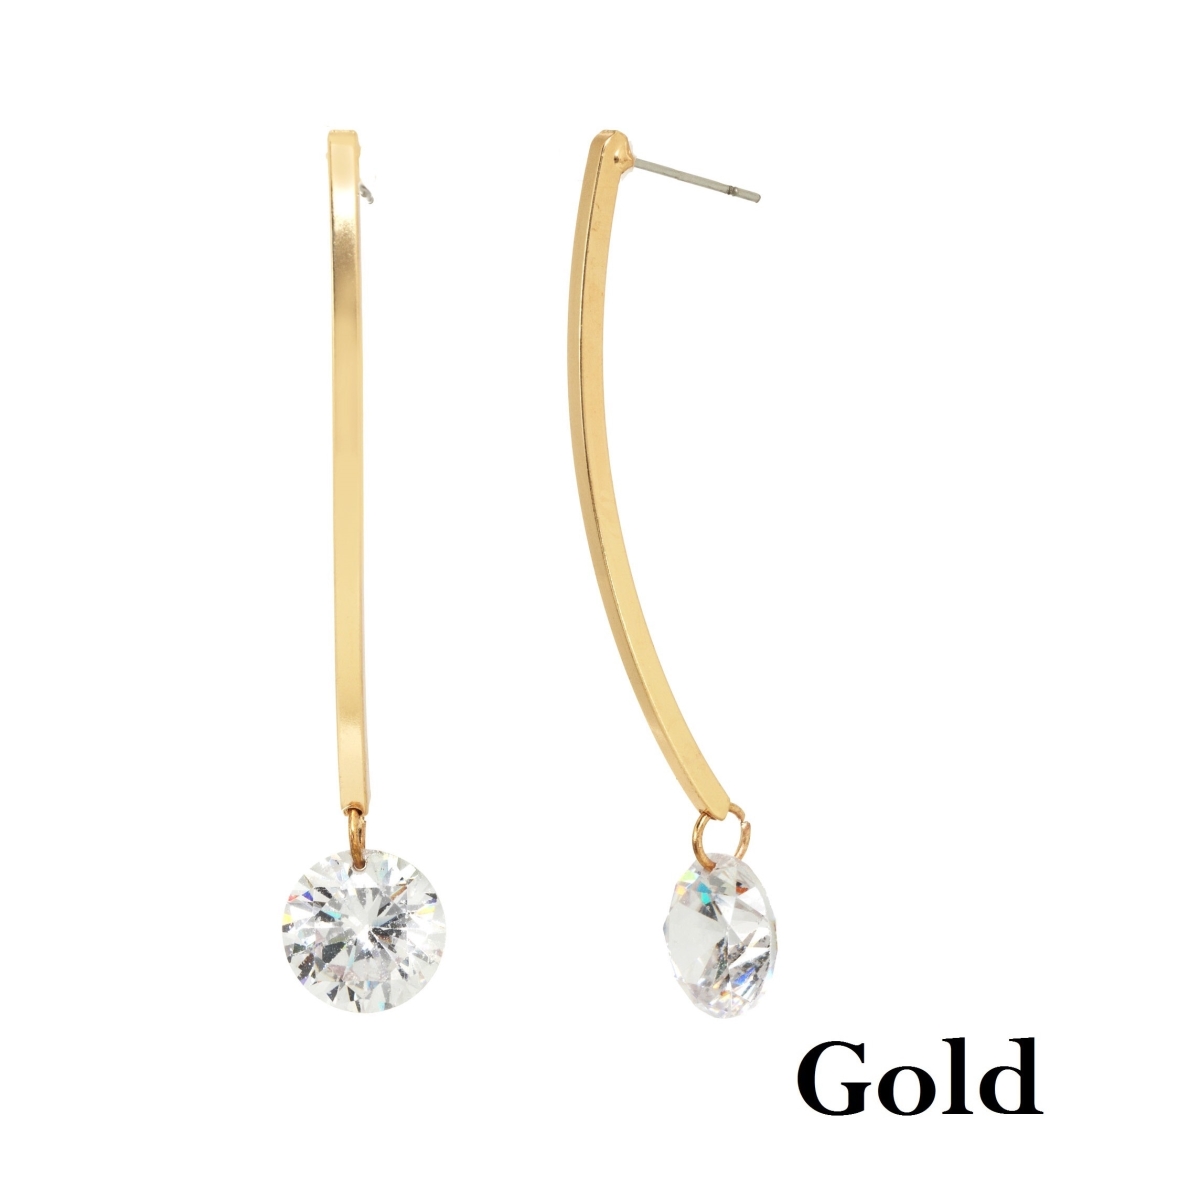 Picture of Alexa Starr 9291-EP-Gold Cubic Zirconia Drop Earrings with Square A Wire, Goldtone